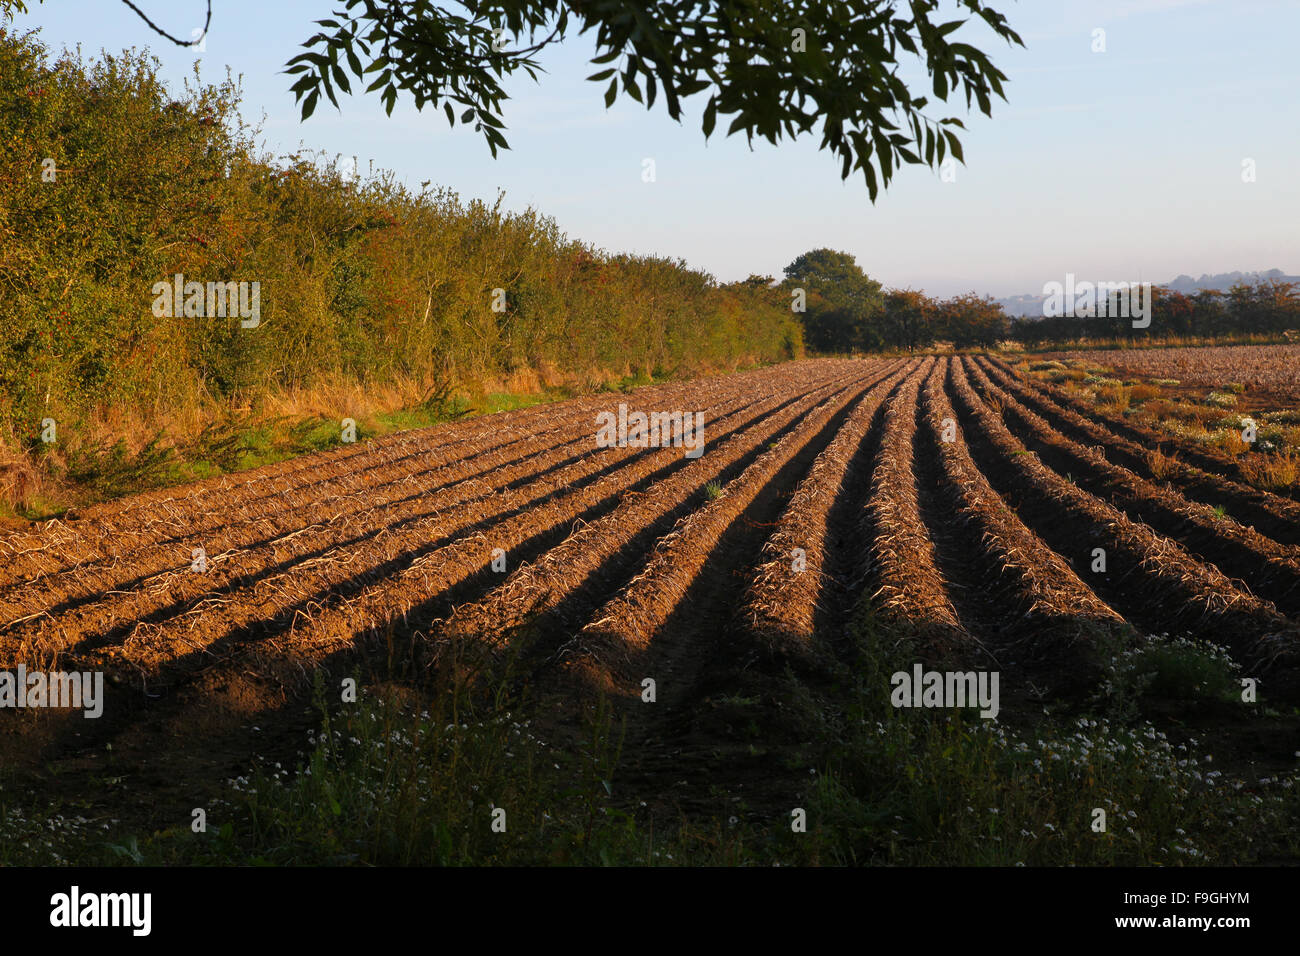 Ploughed field, patterns, straight furrows, ground, seedbed, Autumn soil, sown, tilled, farming, artistic lines, planting, cultivation, ploughing,seed Stock Photo